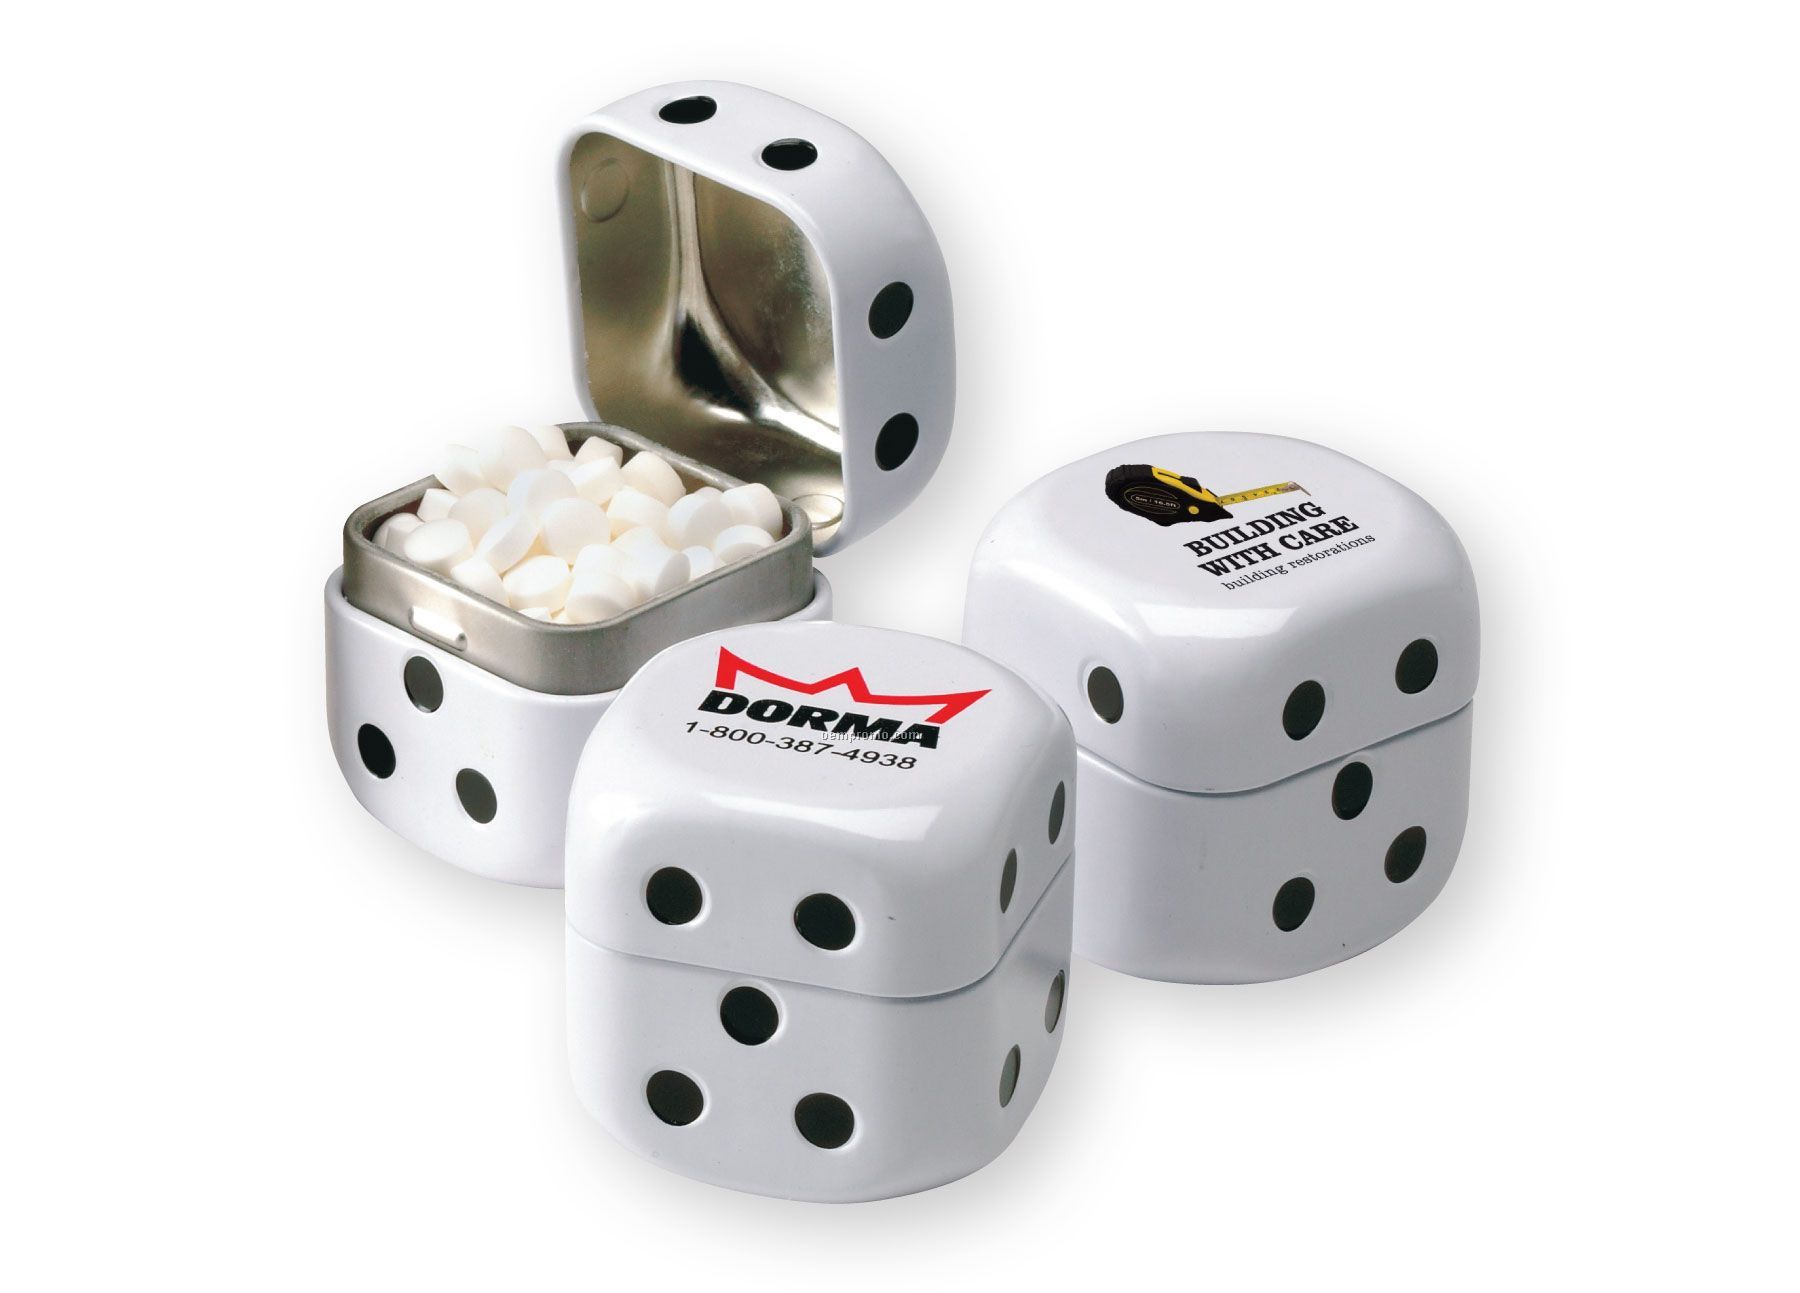 Roll The Dice Tin W/ Sugar-free Micromints